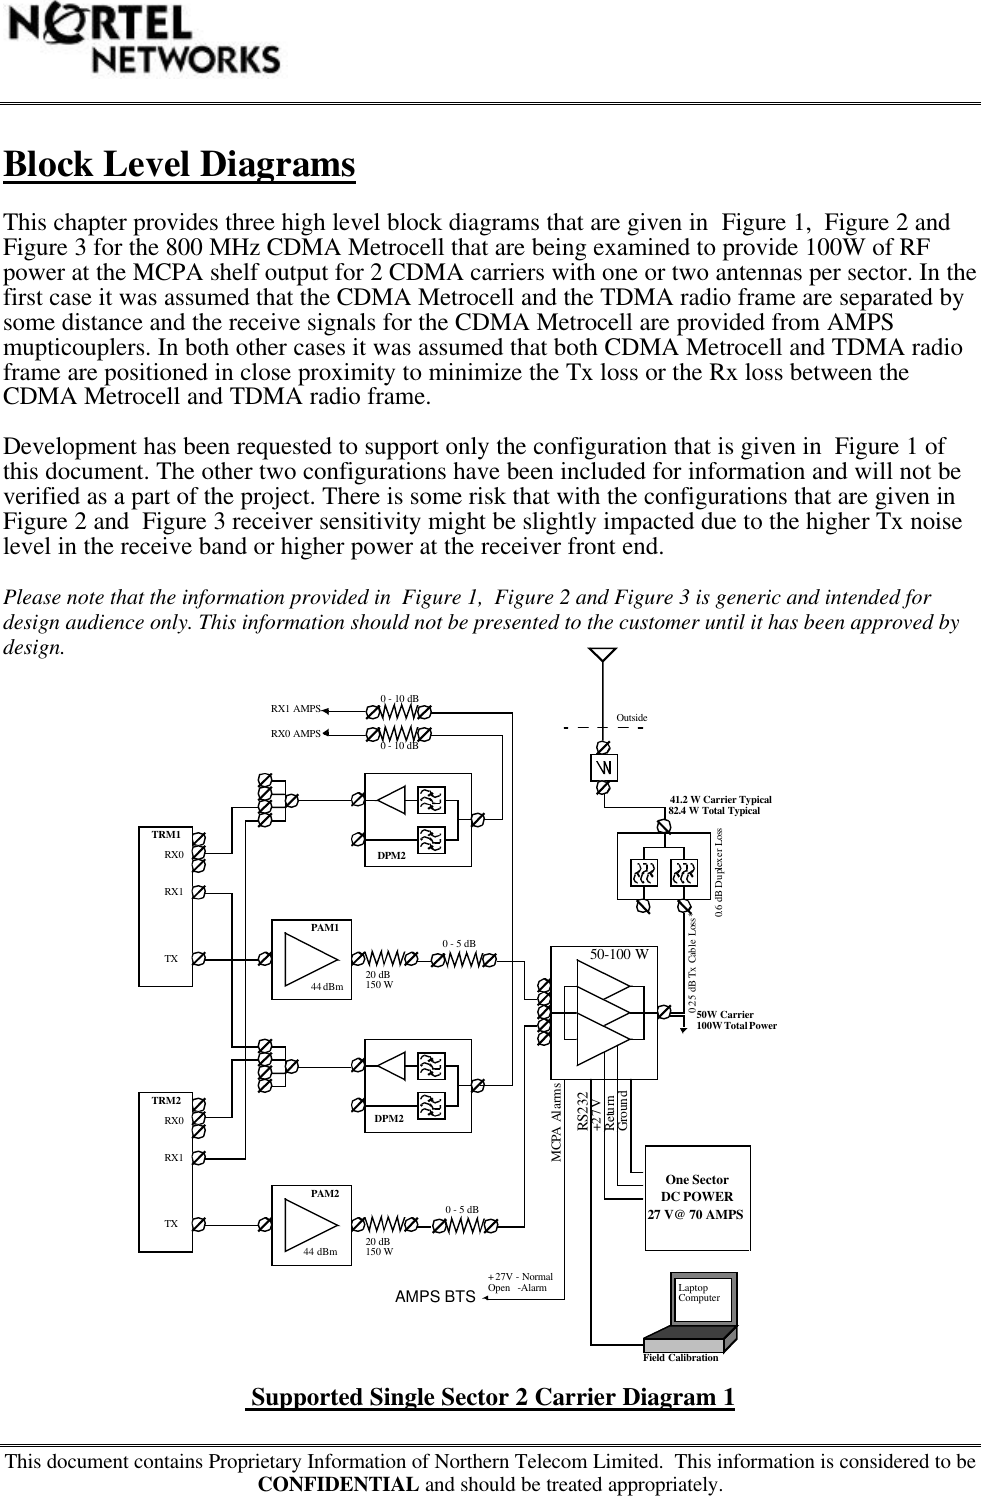 This document contains Proprietary Information of Northern Telecom Limited.  This information is considered to beCONFIDENTIAL and should be treated appropriately.Block Level DiagramsThis chapter provides three high level block diagrams that are given in  Figure 1,  Figure 2 andFigure 3 for the 800 MHz CDMA Metrocell that are being examined to provide 100W of RFpower at the MCPA shelf output for 2 CDMA carriers with one or two antennas per sector. In thefirst case it was assumed that the CDMA Metrocell and the TDMA radio frame are separated bysome distance and the receive signals for the CDMA Metrocell are provided from AMPSmupticouplers. In both other cases it was assumed that both CDMA Metrocell and TDMA radioframe are positioned in close proximity to minimize the Tx loss or the Rx loss between theCDMA Metrocell and TDMA radio frame.Development has been requested to support only the configuration that is given in  Figure 1 ofthis document. The other two configurations have been included for information and will not beverified as a part of the project. There is some risk that with the configurations that are given inFigure 2 and  Figure 3 receiver sensitivity might be slightly impacted due to the higher Tx noiselevel in the receive band or higher power at the receiver front end.Please note that the information provided in  Figure 1,  Figure 2 and Figure 3 is generic and intended fordesign audience only. This information should not be presented to the customer until it has been approved bydesign. Supported Single Sector 2 Carrier Diagram 1RS232+27 VReturnGround50-100 W20 dB150 WOutsideLaptopComputerDC POWER27 V@ 70 AMPSOne SectorTRM1RX0RX1TXTRM2RX0RX1TXPAM2PAM144 dBm44 dBmDPM2DPM220 dB150 WField Calibration50W Carrier100W Total Power0 - 5 dB0 - 5 dB0.25 dB Tx Cable Loss*41.2 W Carrier Typical82.4 W Total TypicalMCPA Alarms+ 27V - NormalOpen   -Alarm0.6 dB Duplexer Loss0 - 10 dB0 - 10 dBRX1 AMPSRX0 AMPSAMPS BTS